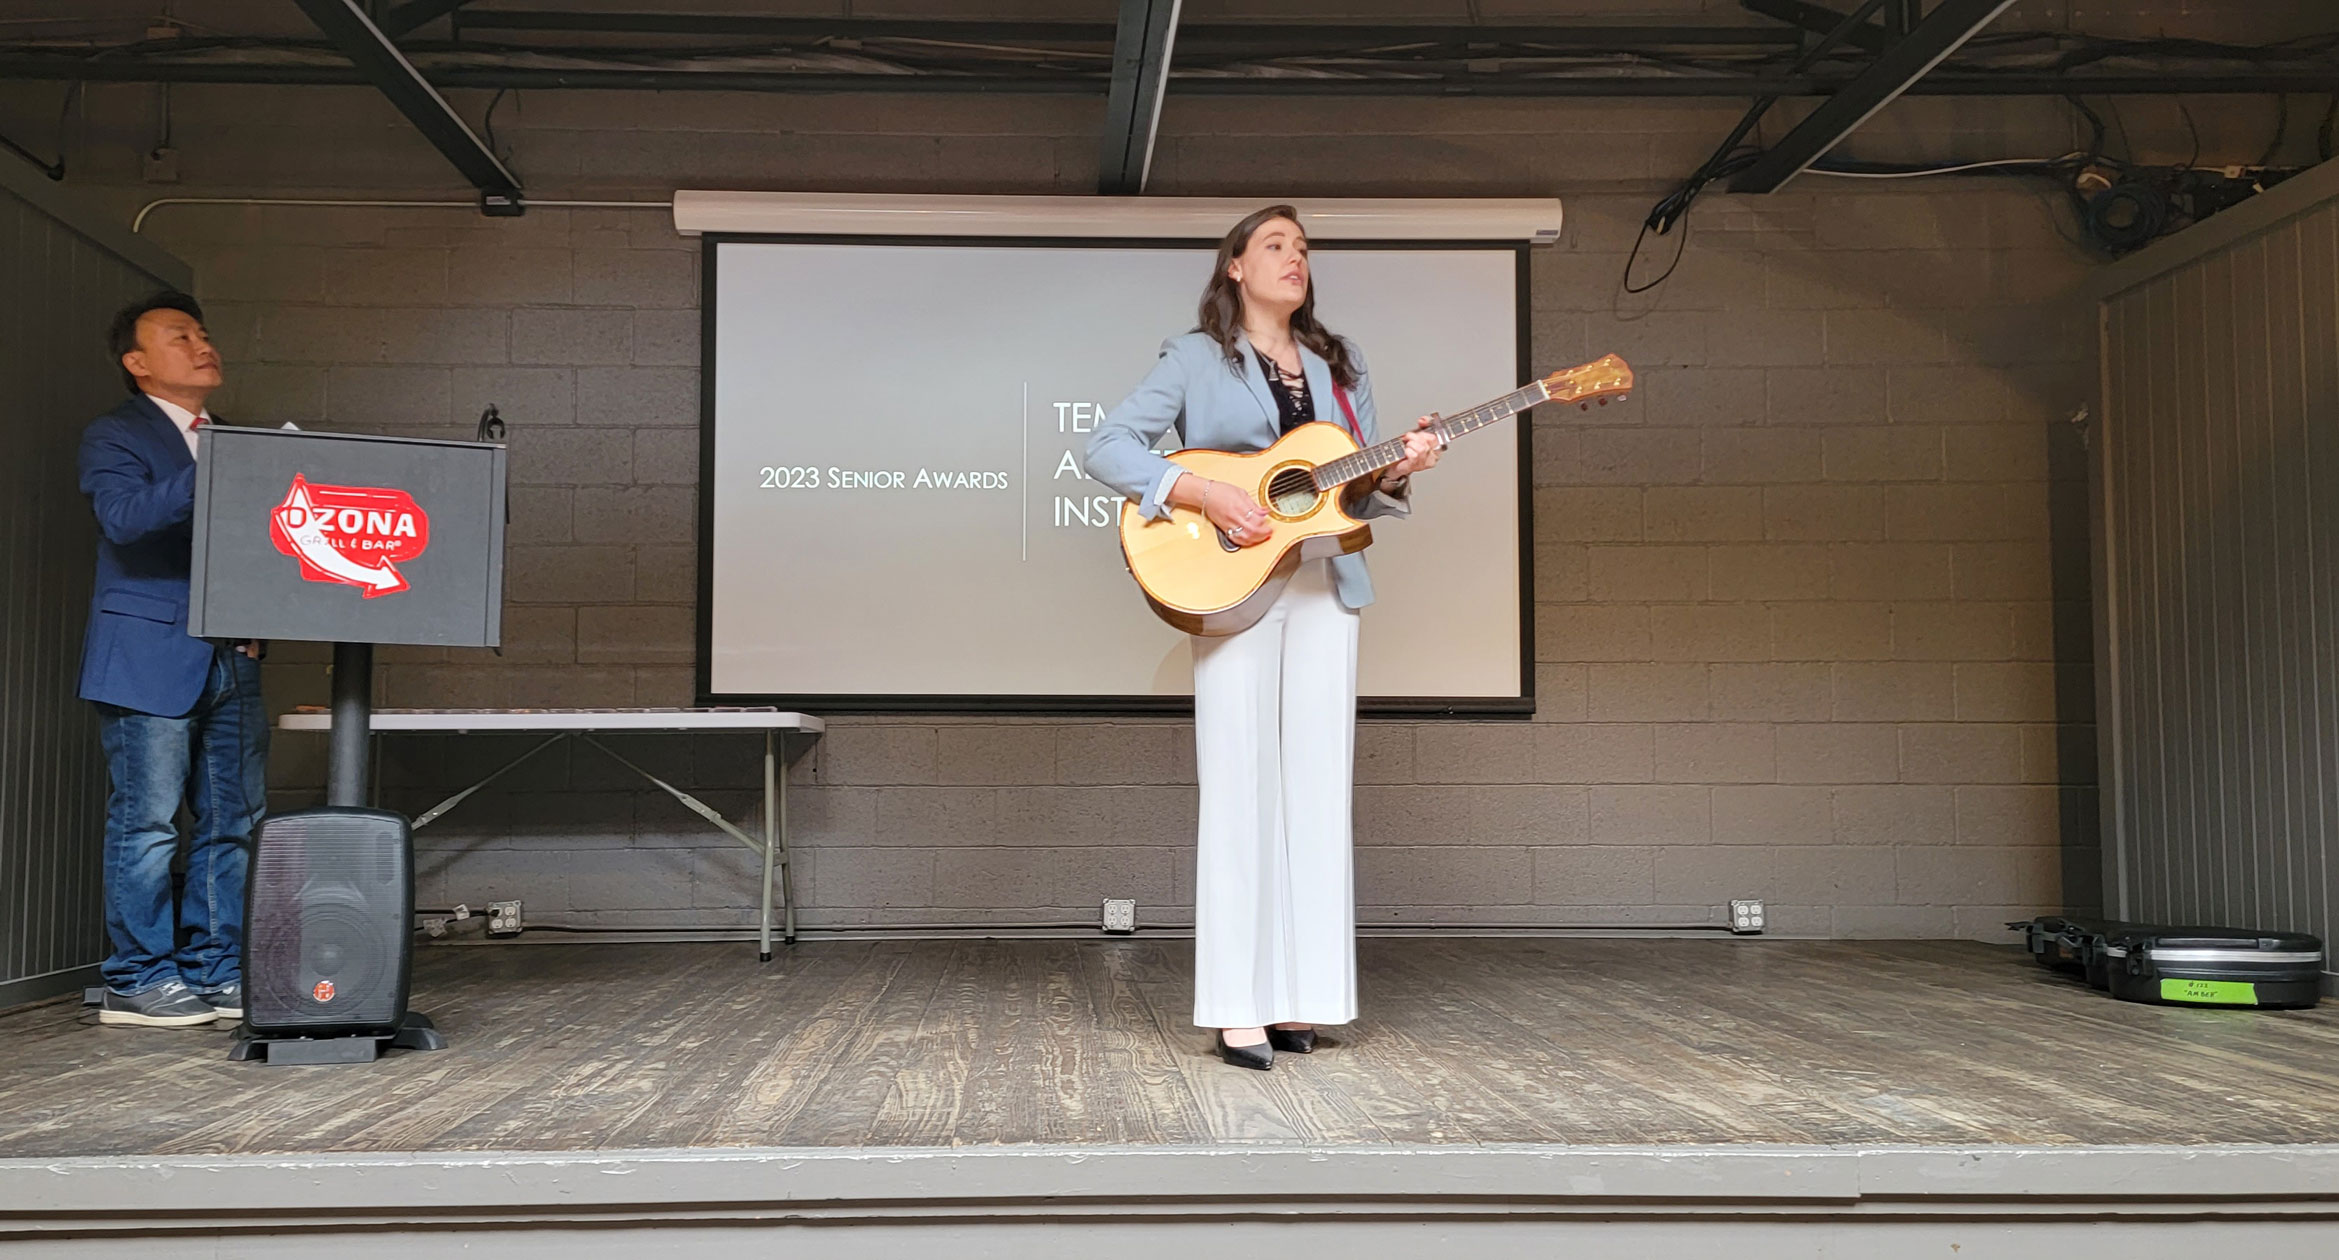 Advertising student Amber Bormann plays original music during the Temerlin Awards Ceremony.